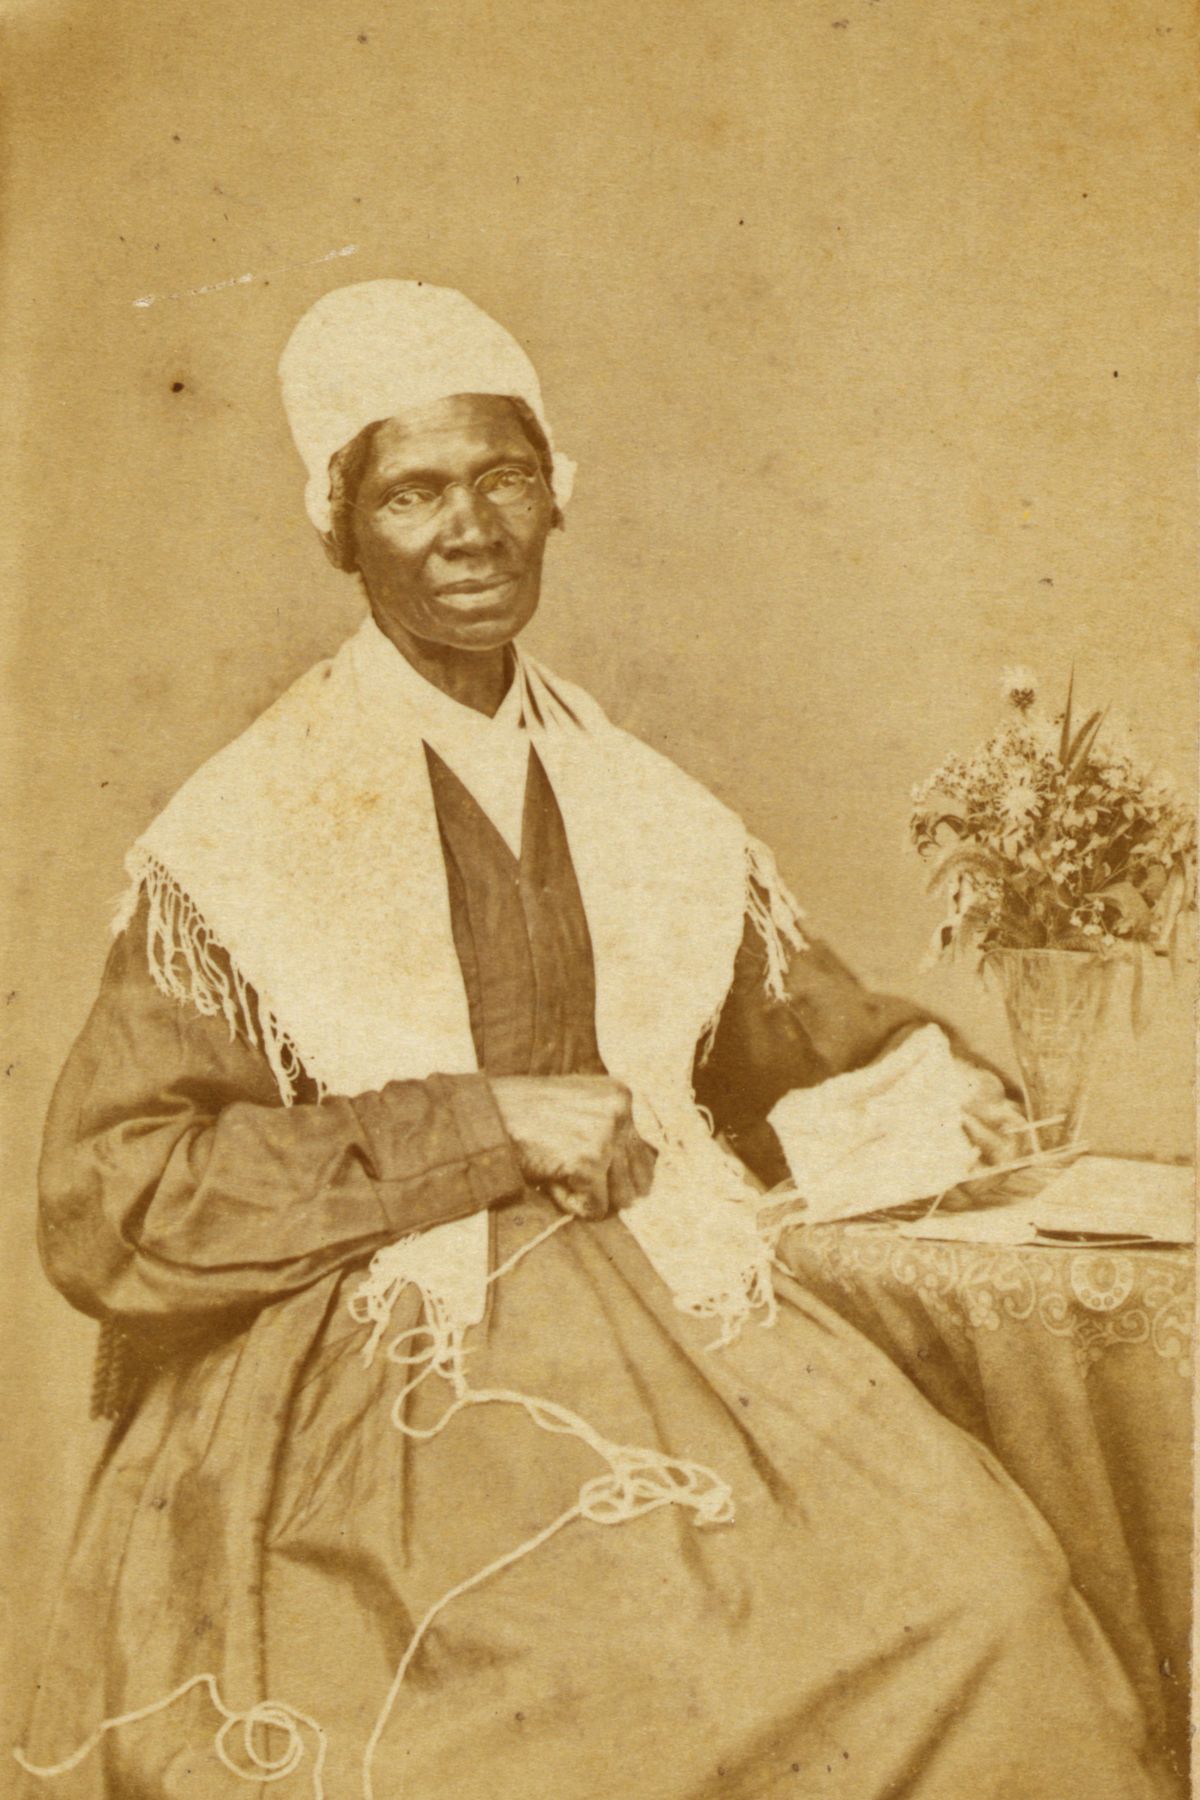 Sojourner Truth, three-quarter length portrait, seated at table with knitting and book